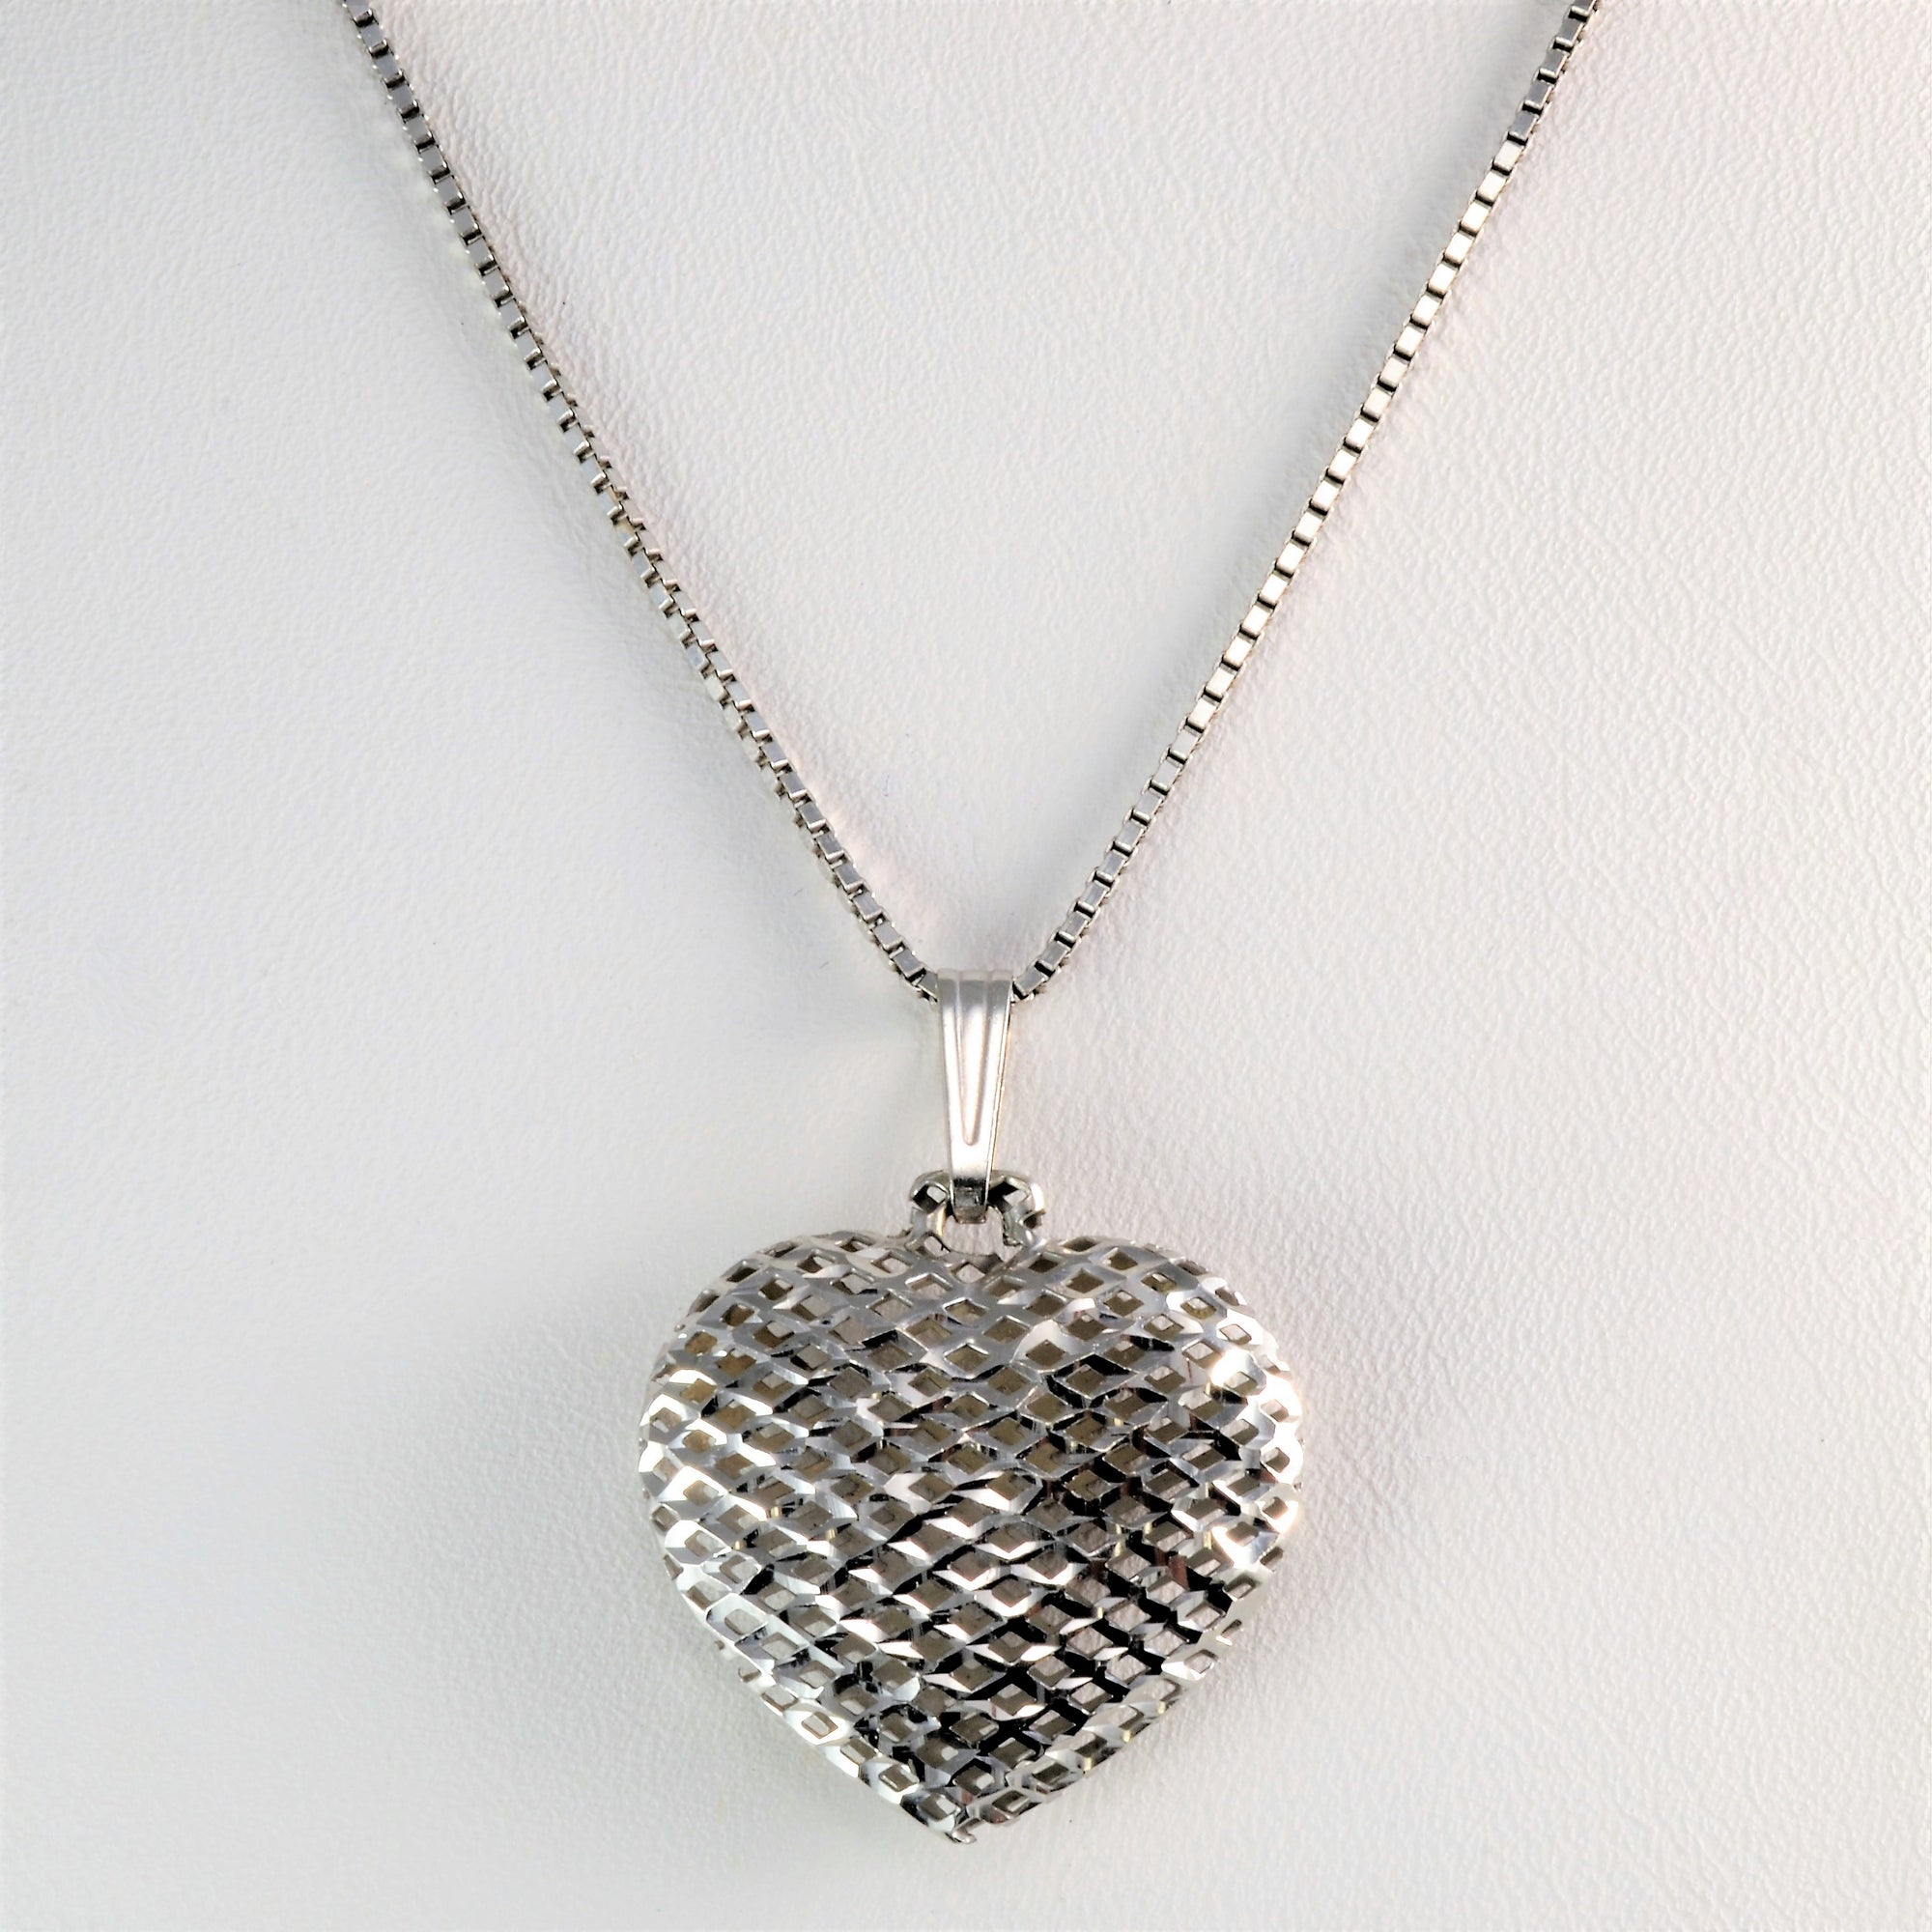 Woven Puffed Heart Pendant Necklace | 17''|